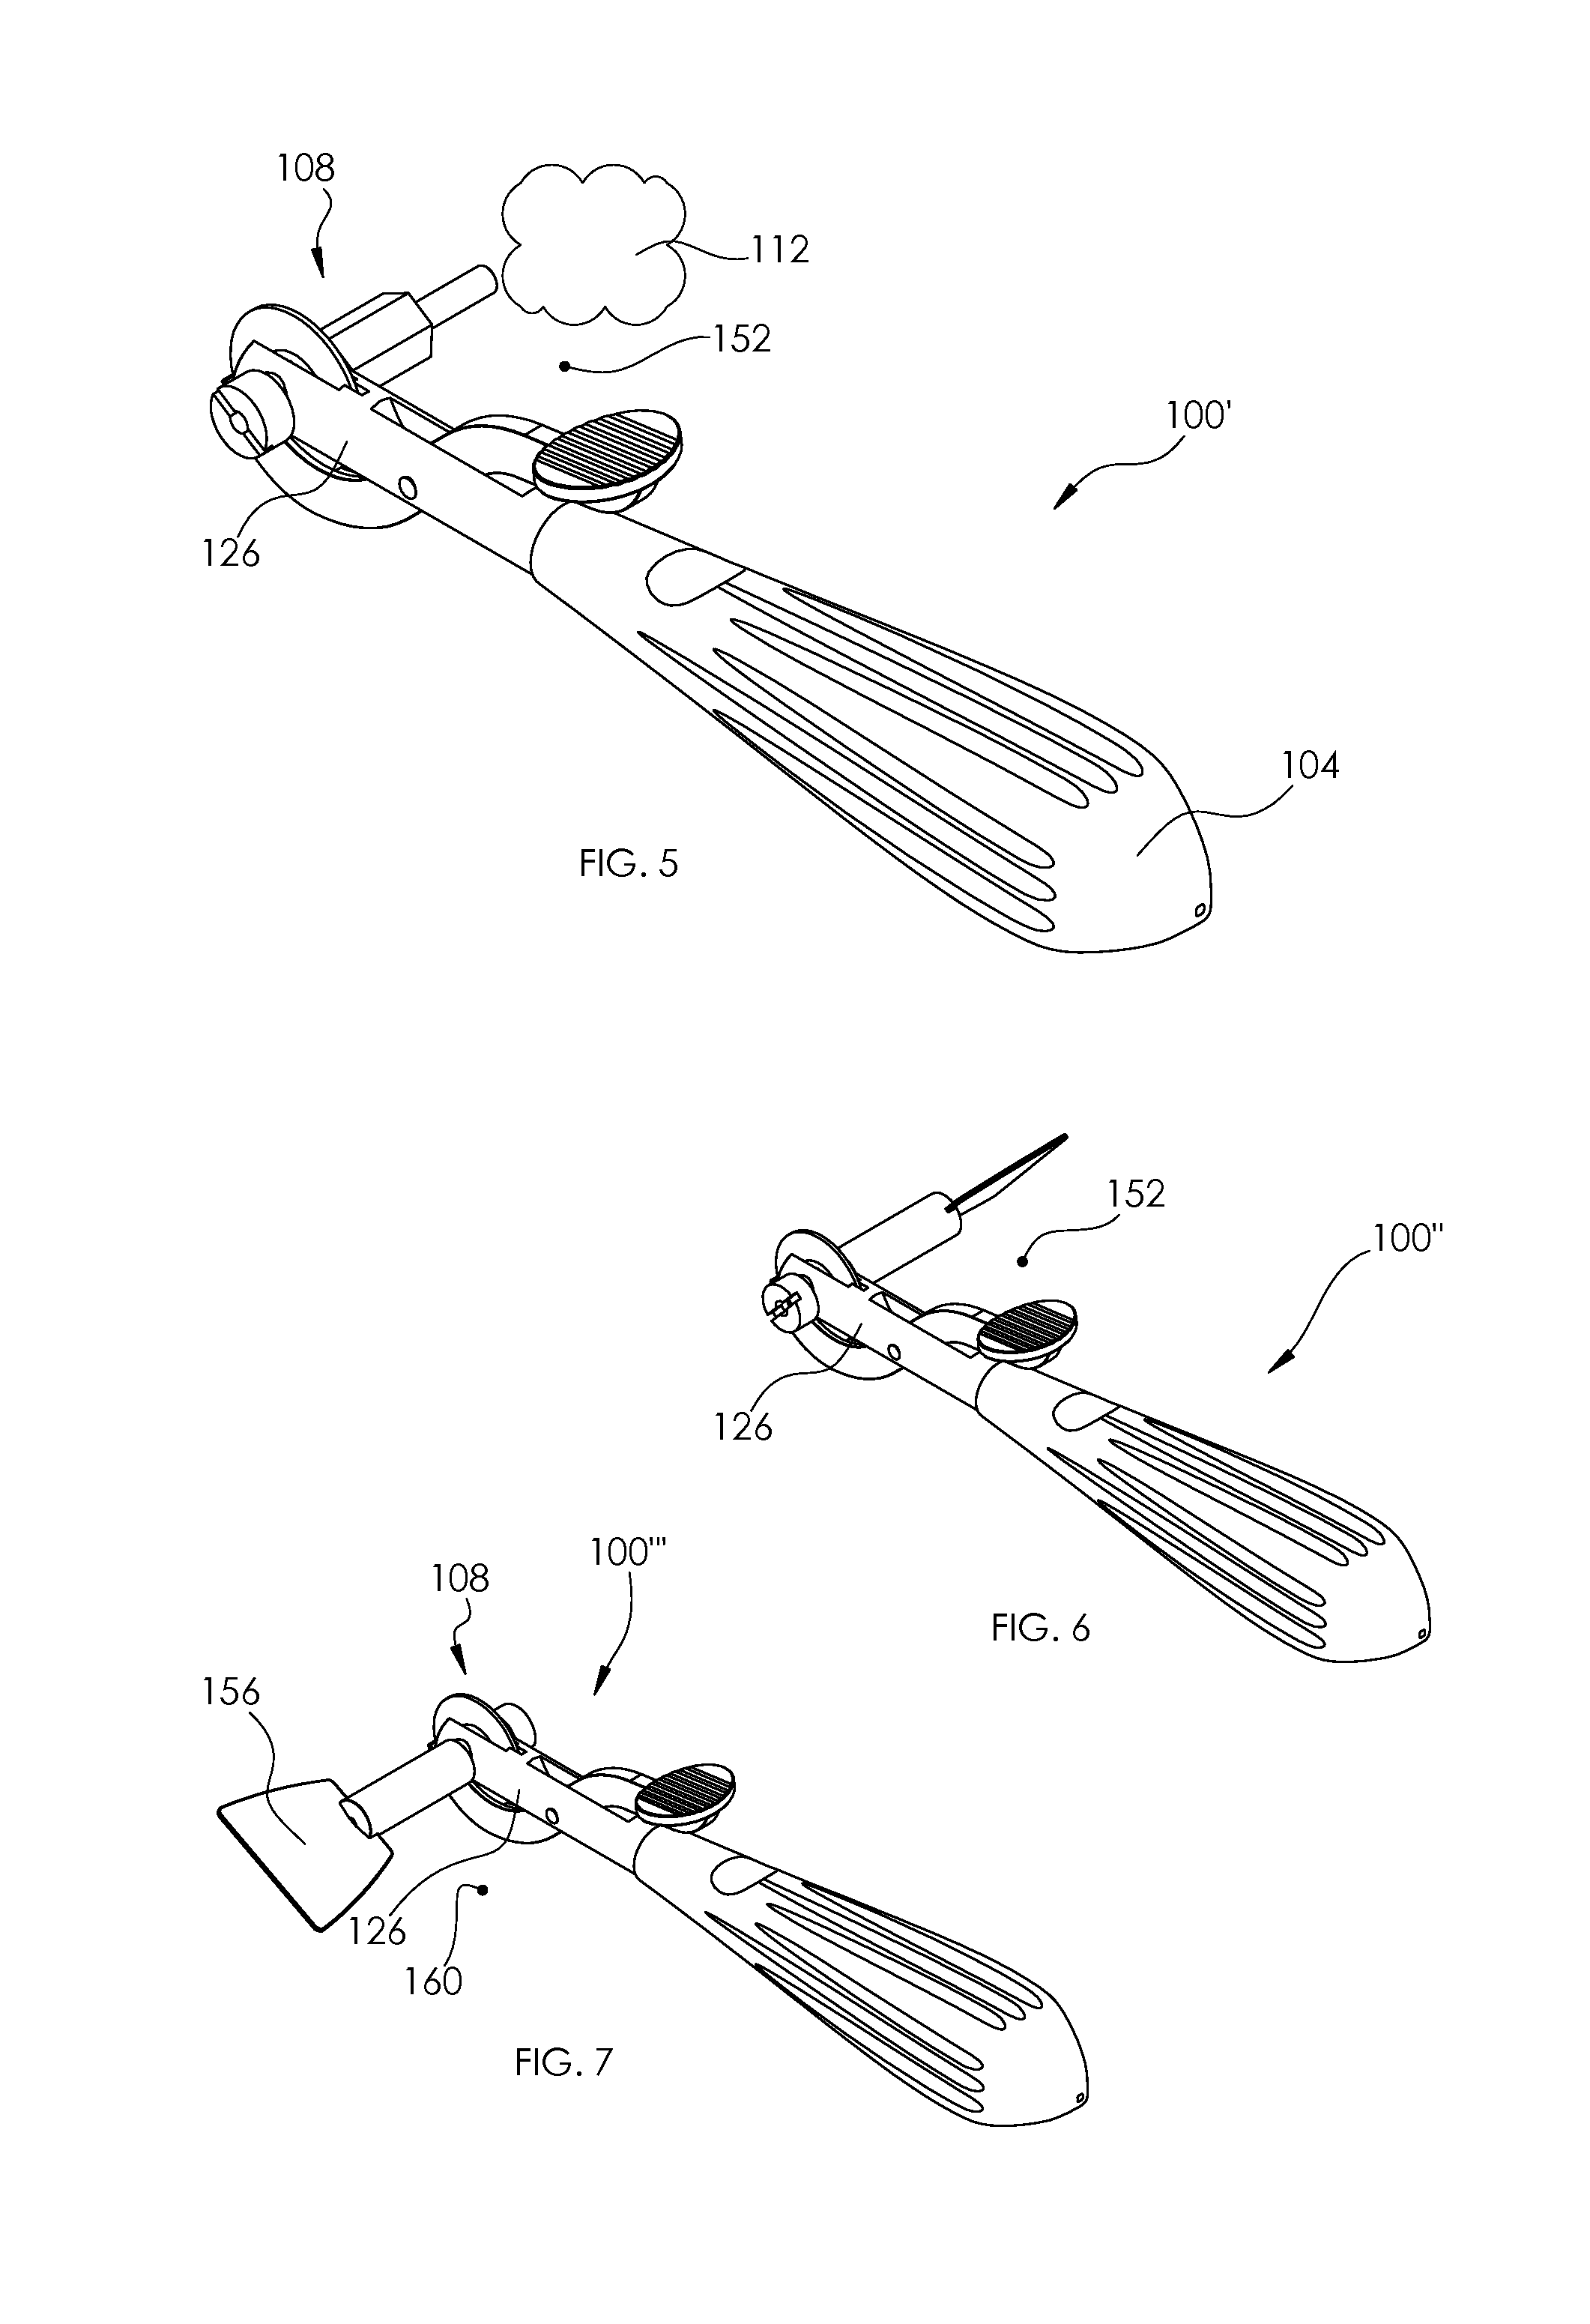 Ring cutting device and method